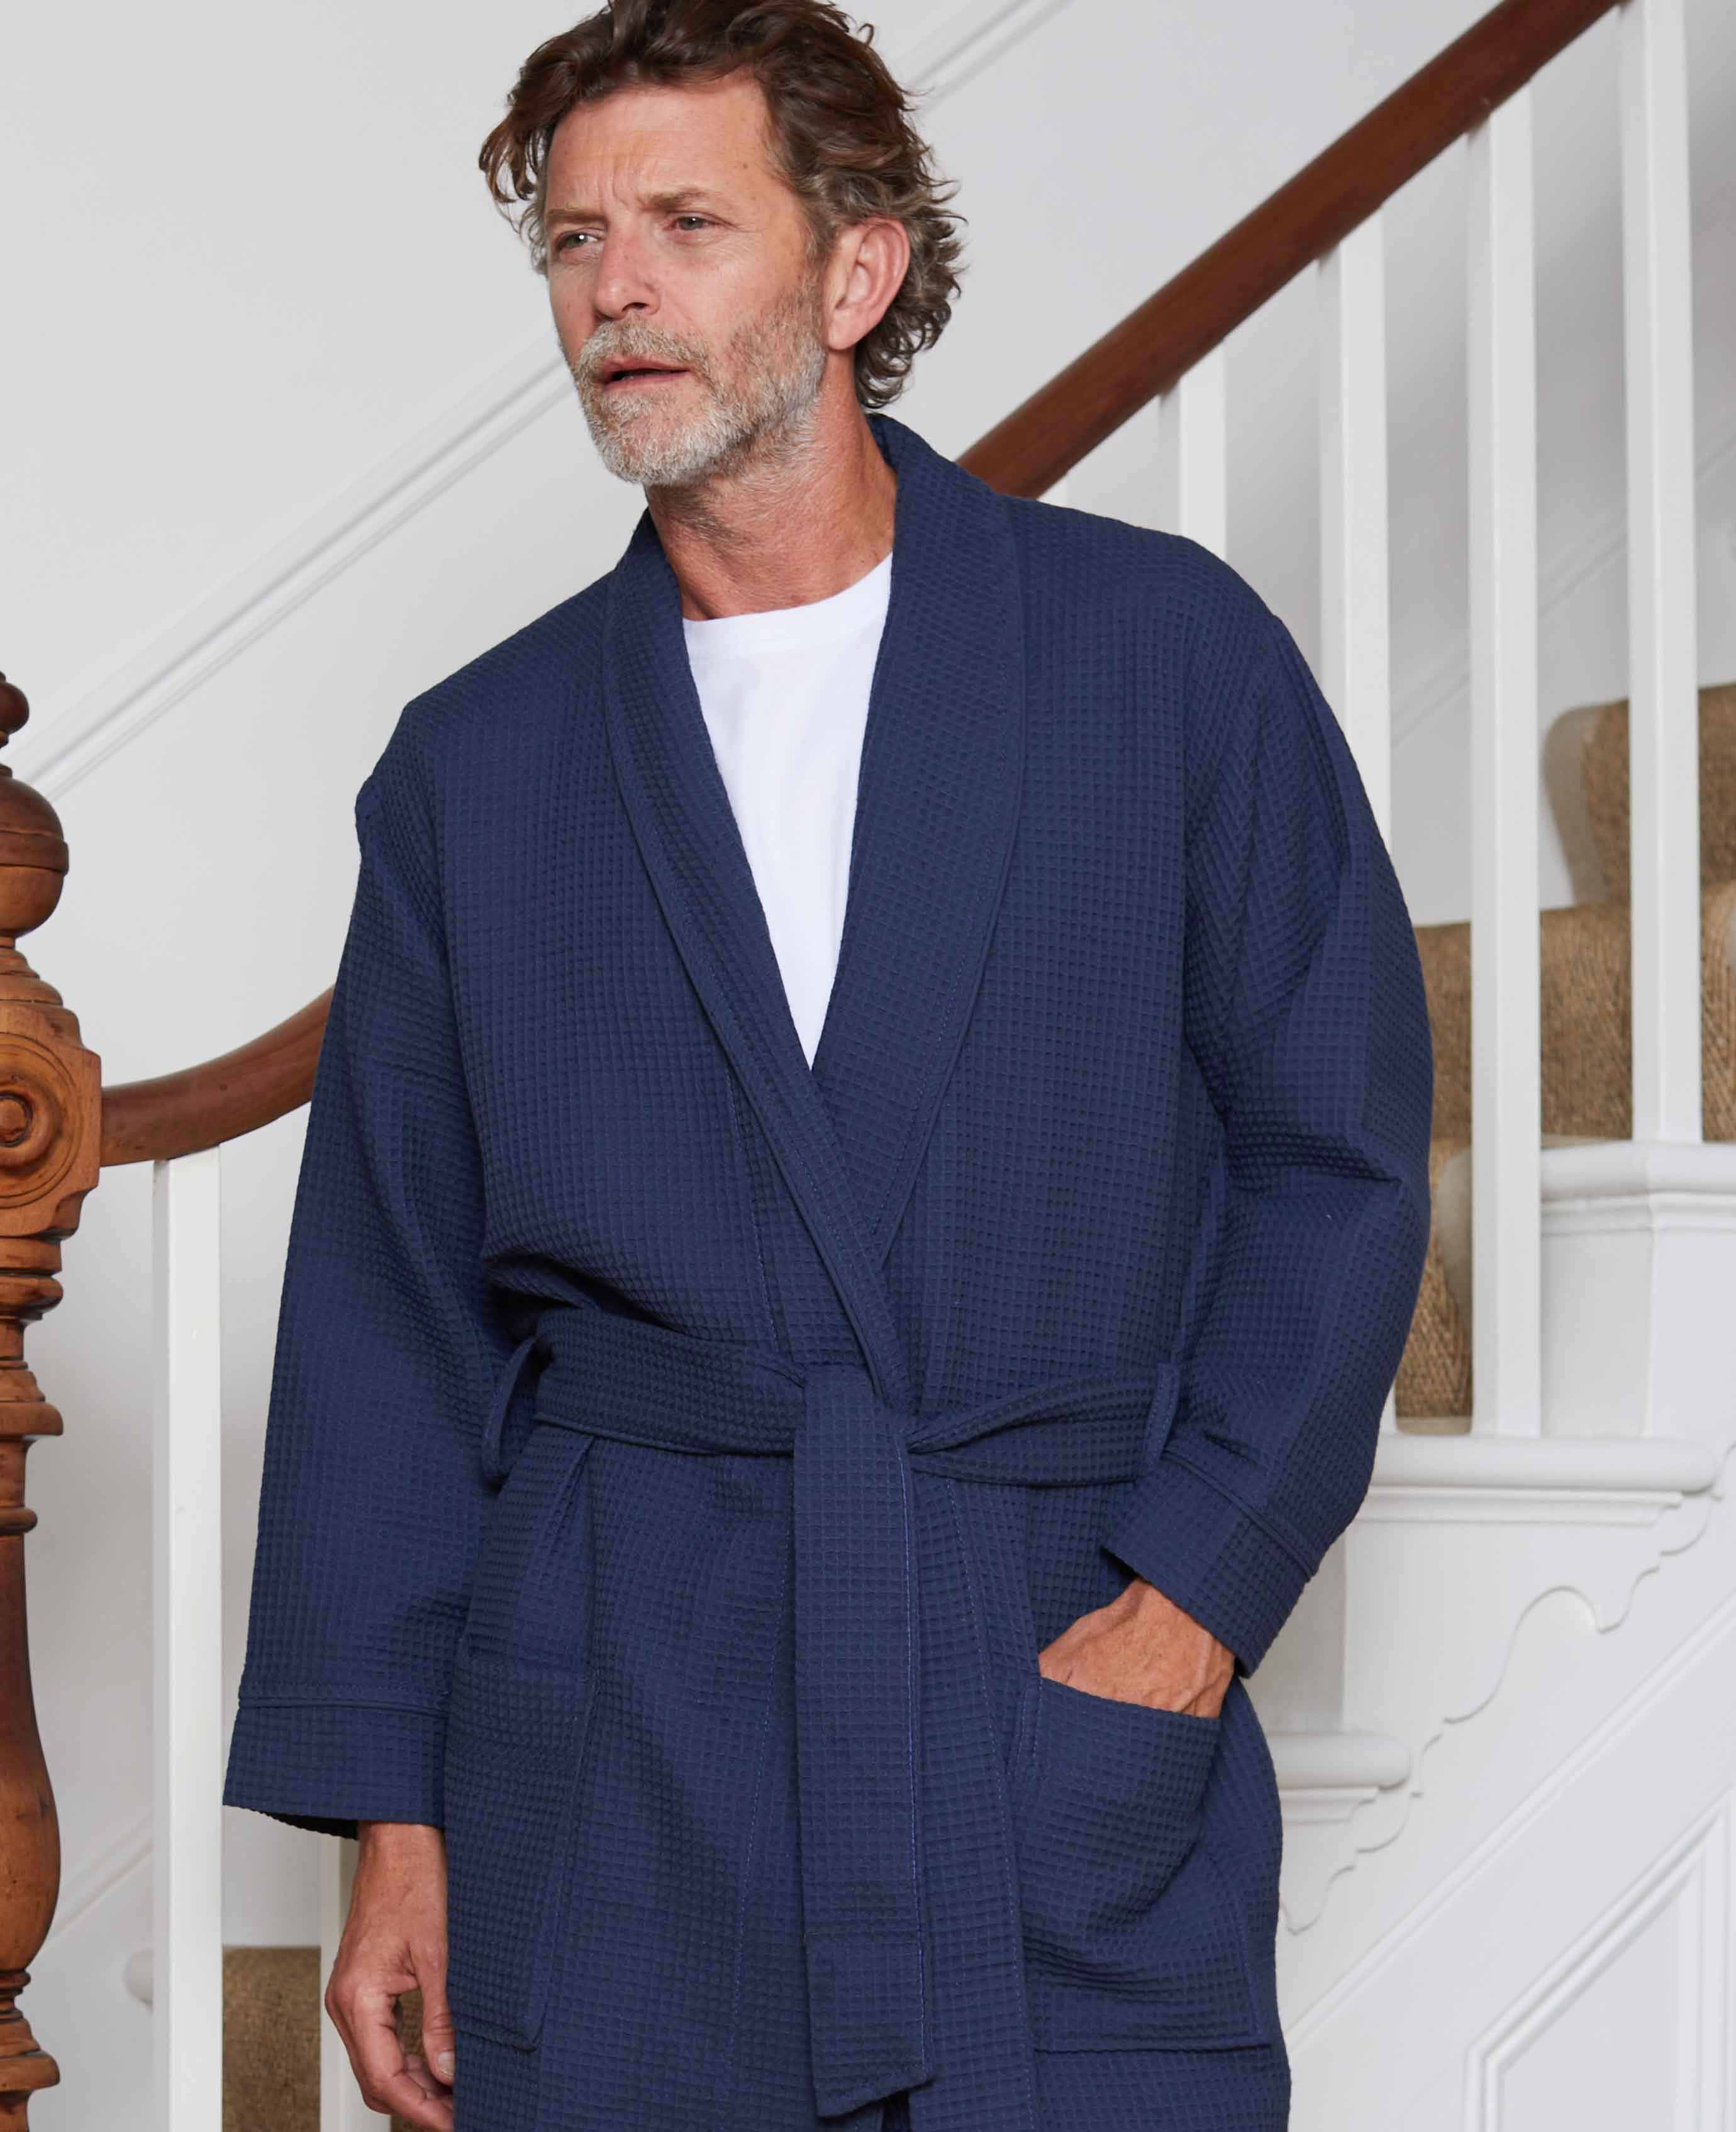 Mens White Cotton Waffle Dressing Gown  Savile Row Co